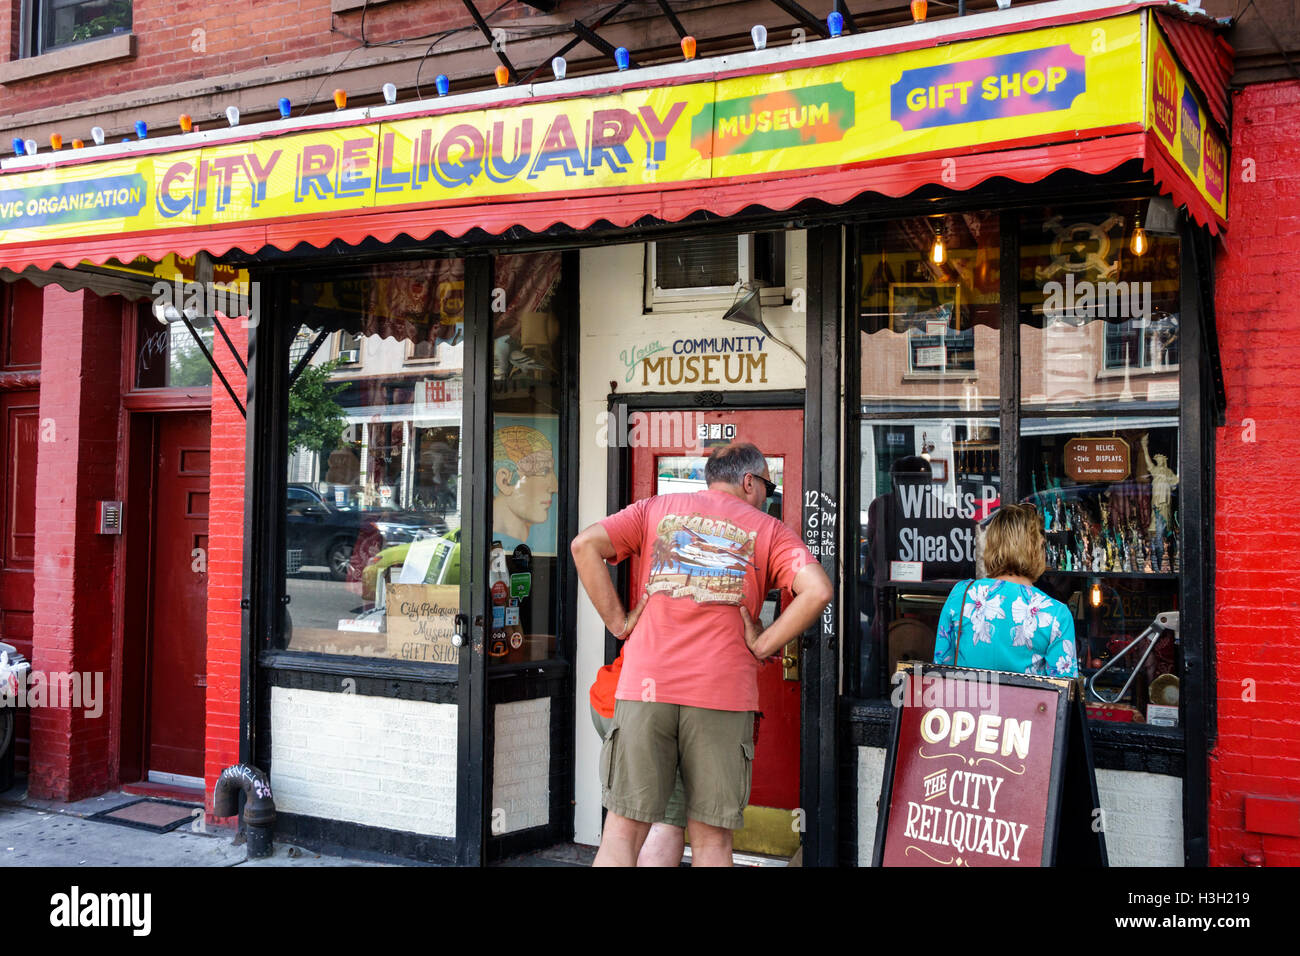 New York City,NY NYC Brooklyn,Williamsburg,City Reliquary Museum,nonprofit heritage,artifacts,exterior,entrance,sign,adult,adults,man men male,woman f Stock Photo